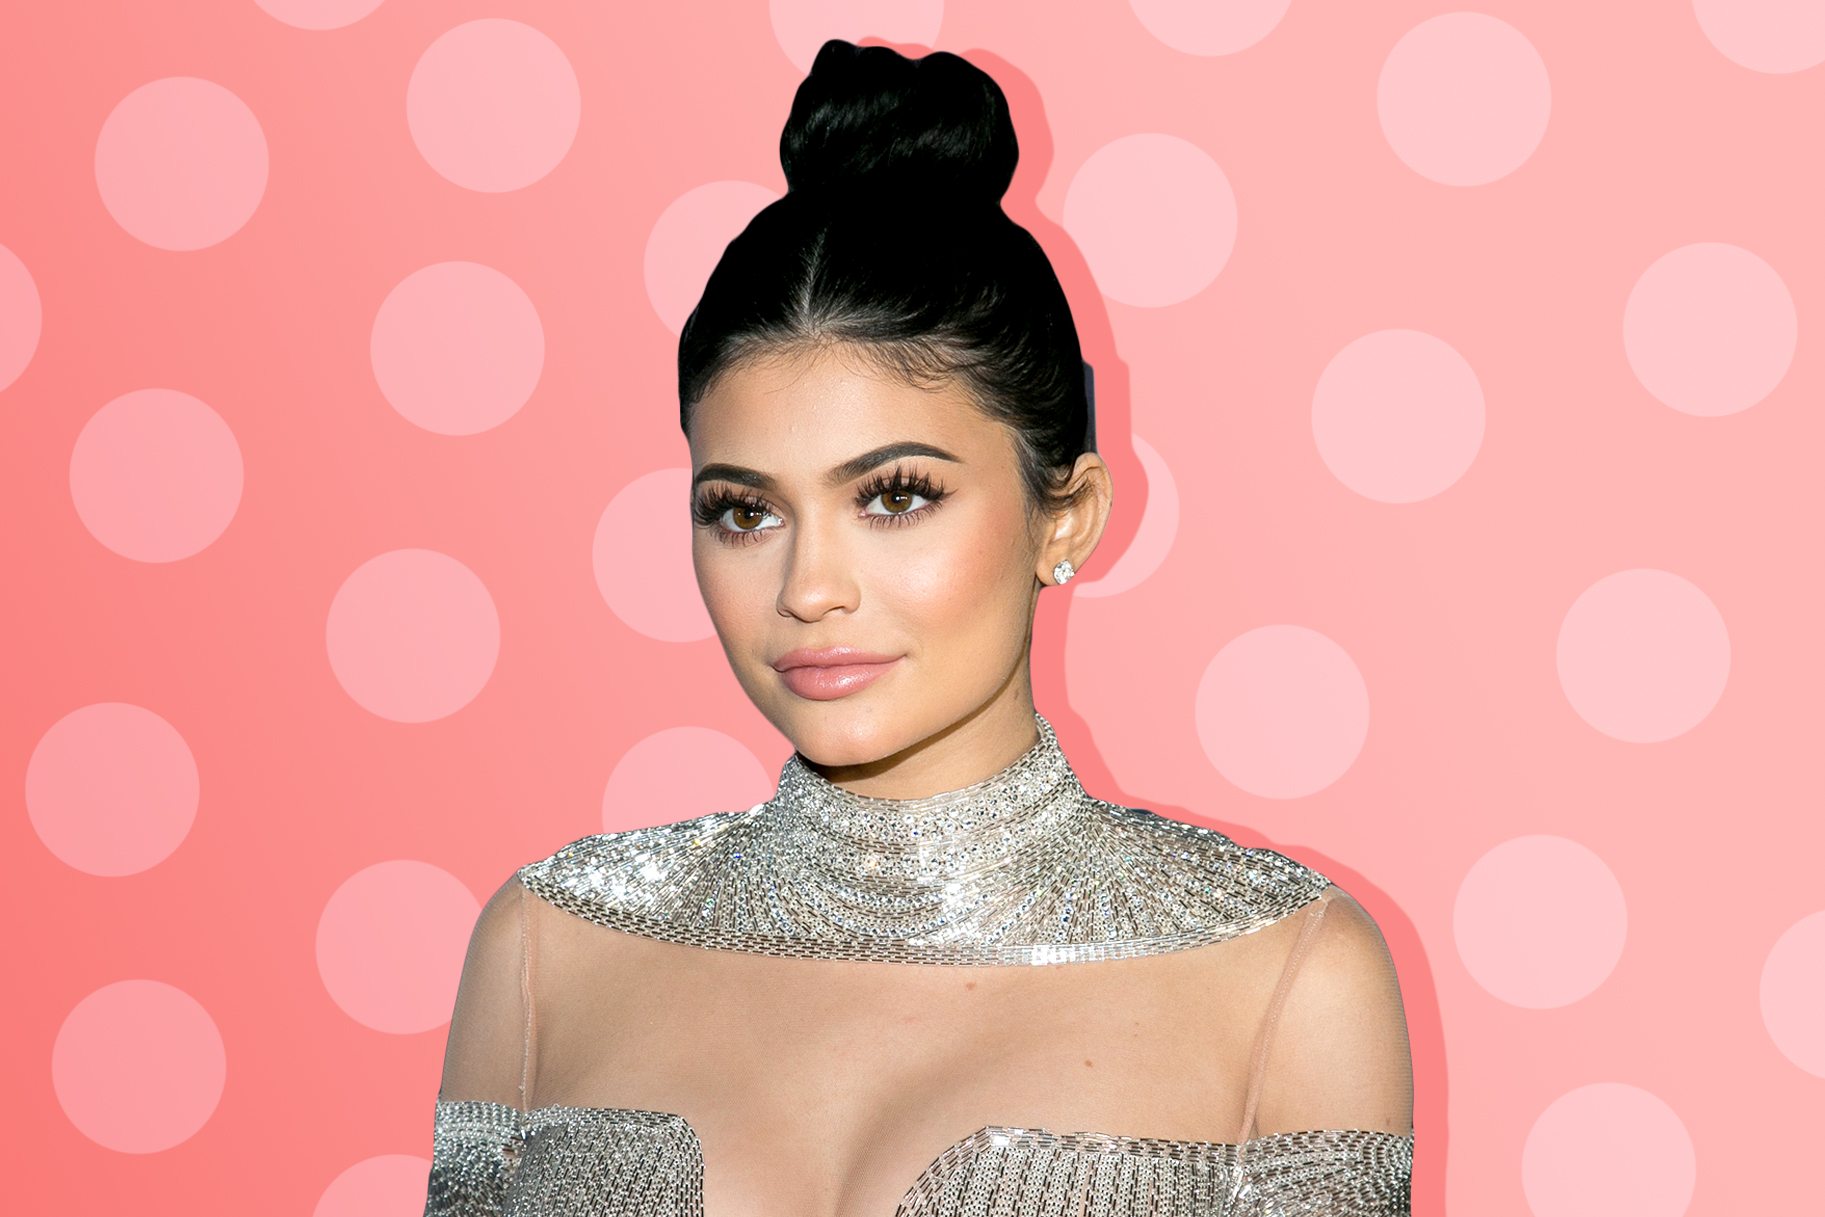 Gasp! See Kylie Jenner's Cute Blunt Lob